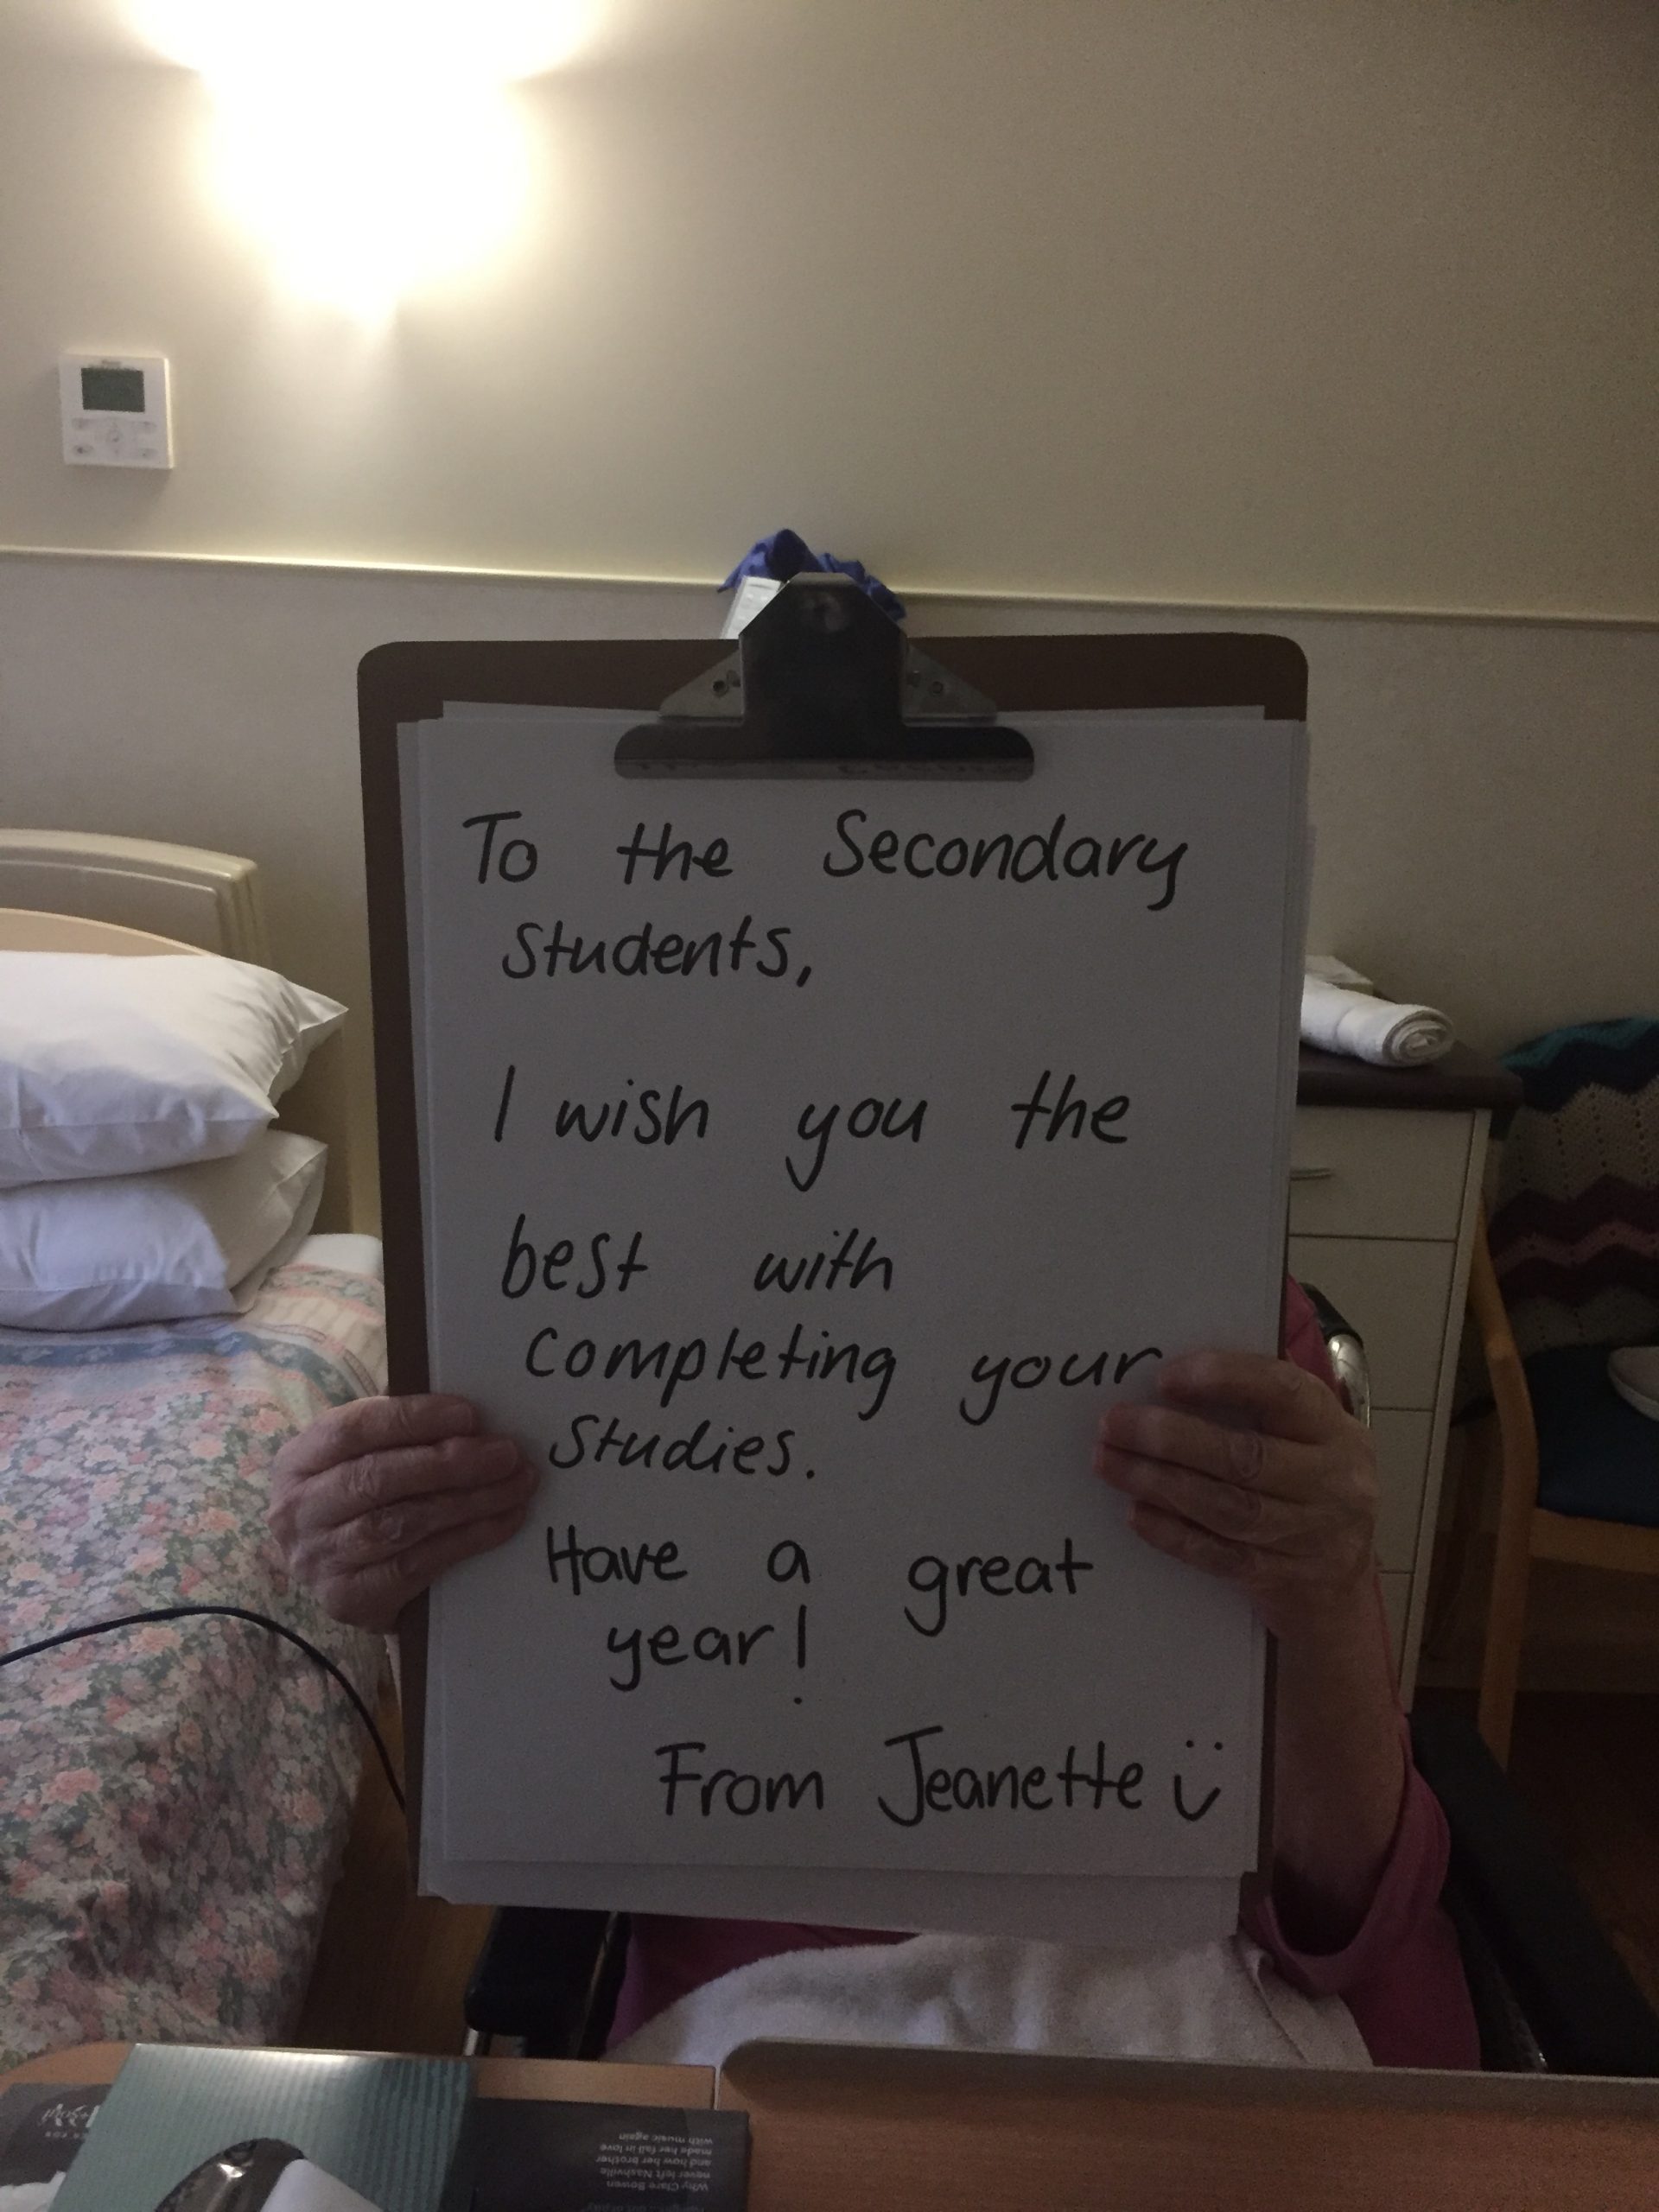 Jeanette, a resident, is obscured behind a large clipboard she is holding, which has a personal message written on it which reads "To the Secondary Students, I wish you the best with completing your studies. Have a great year! From Jeanette"